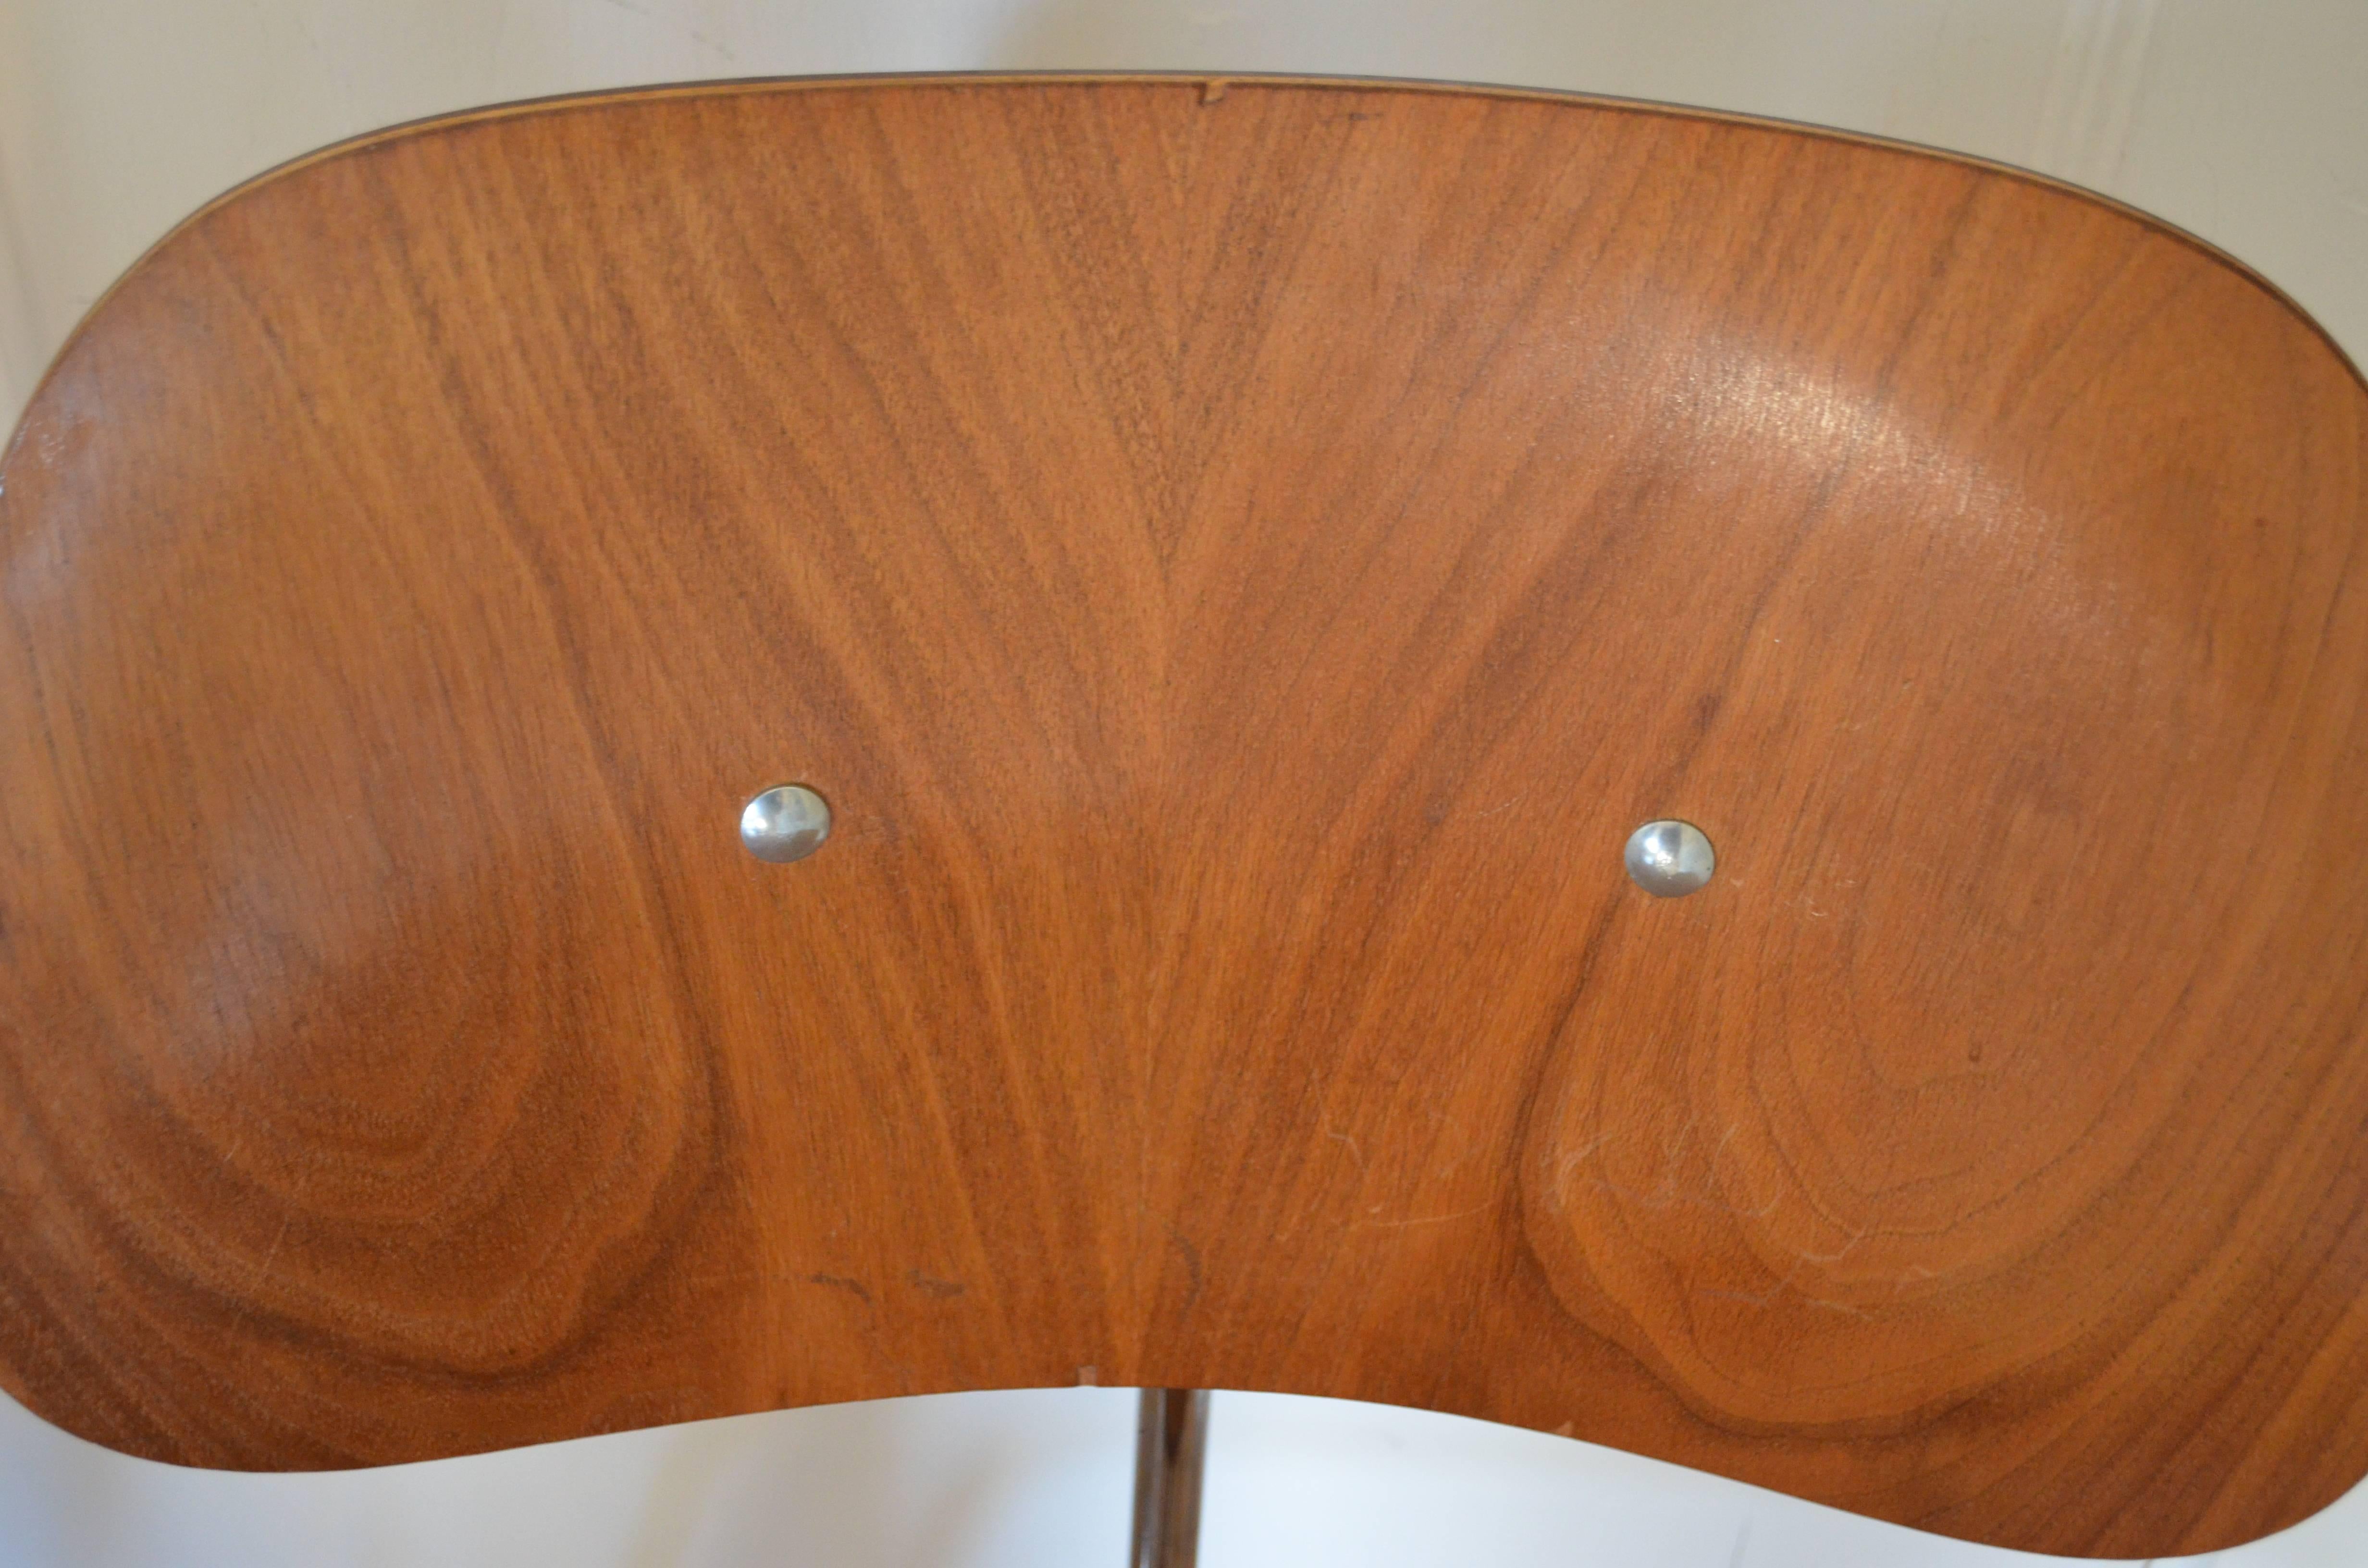 Herman Miller 1950s Walnut Dining Room Chair Chairs w/new HM Frames; Qty avail 1